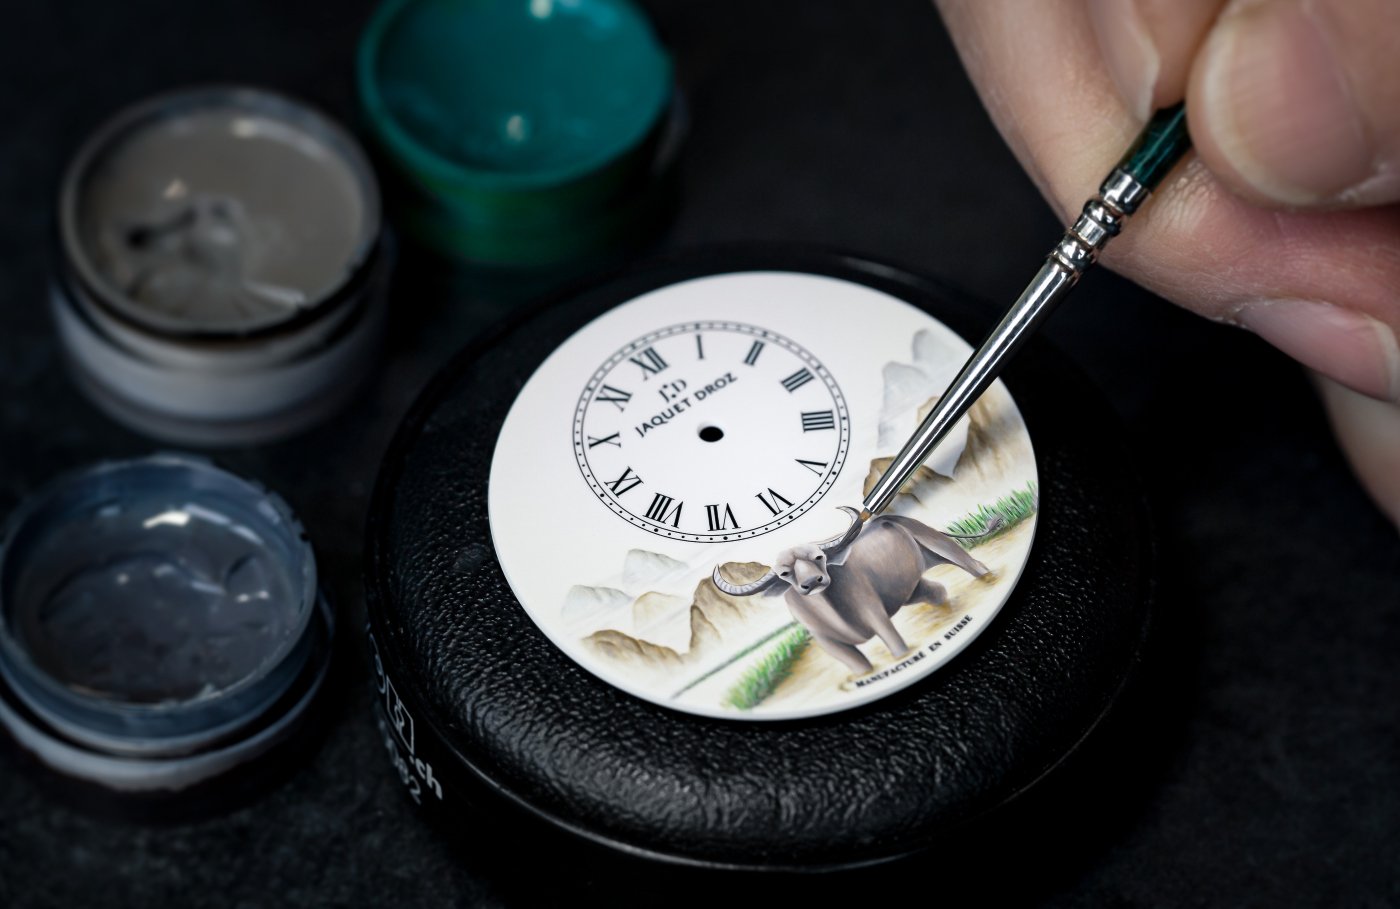 Jaquet Droz Limited Series celebrating The Chinese New Year